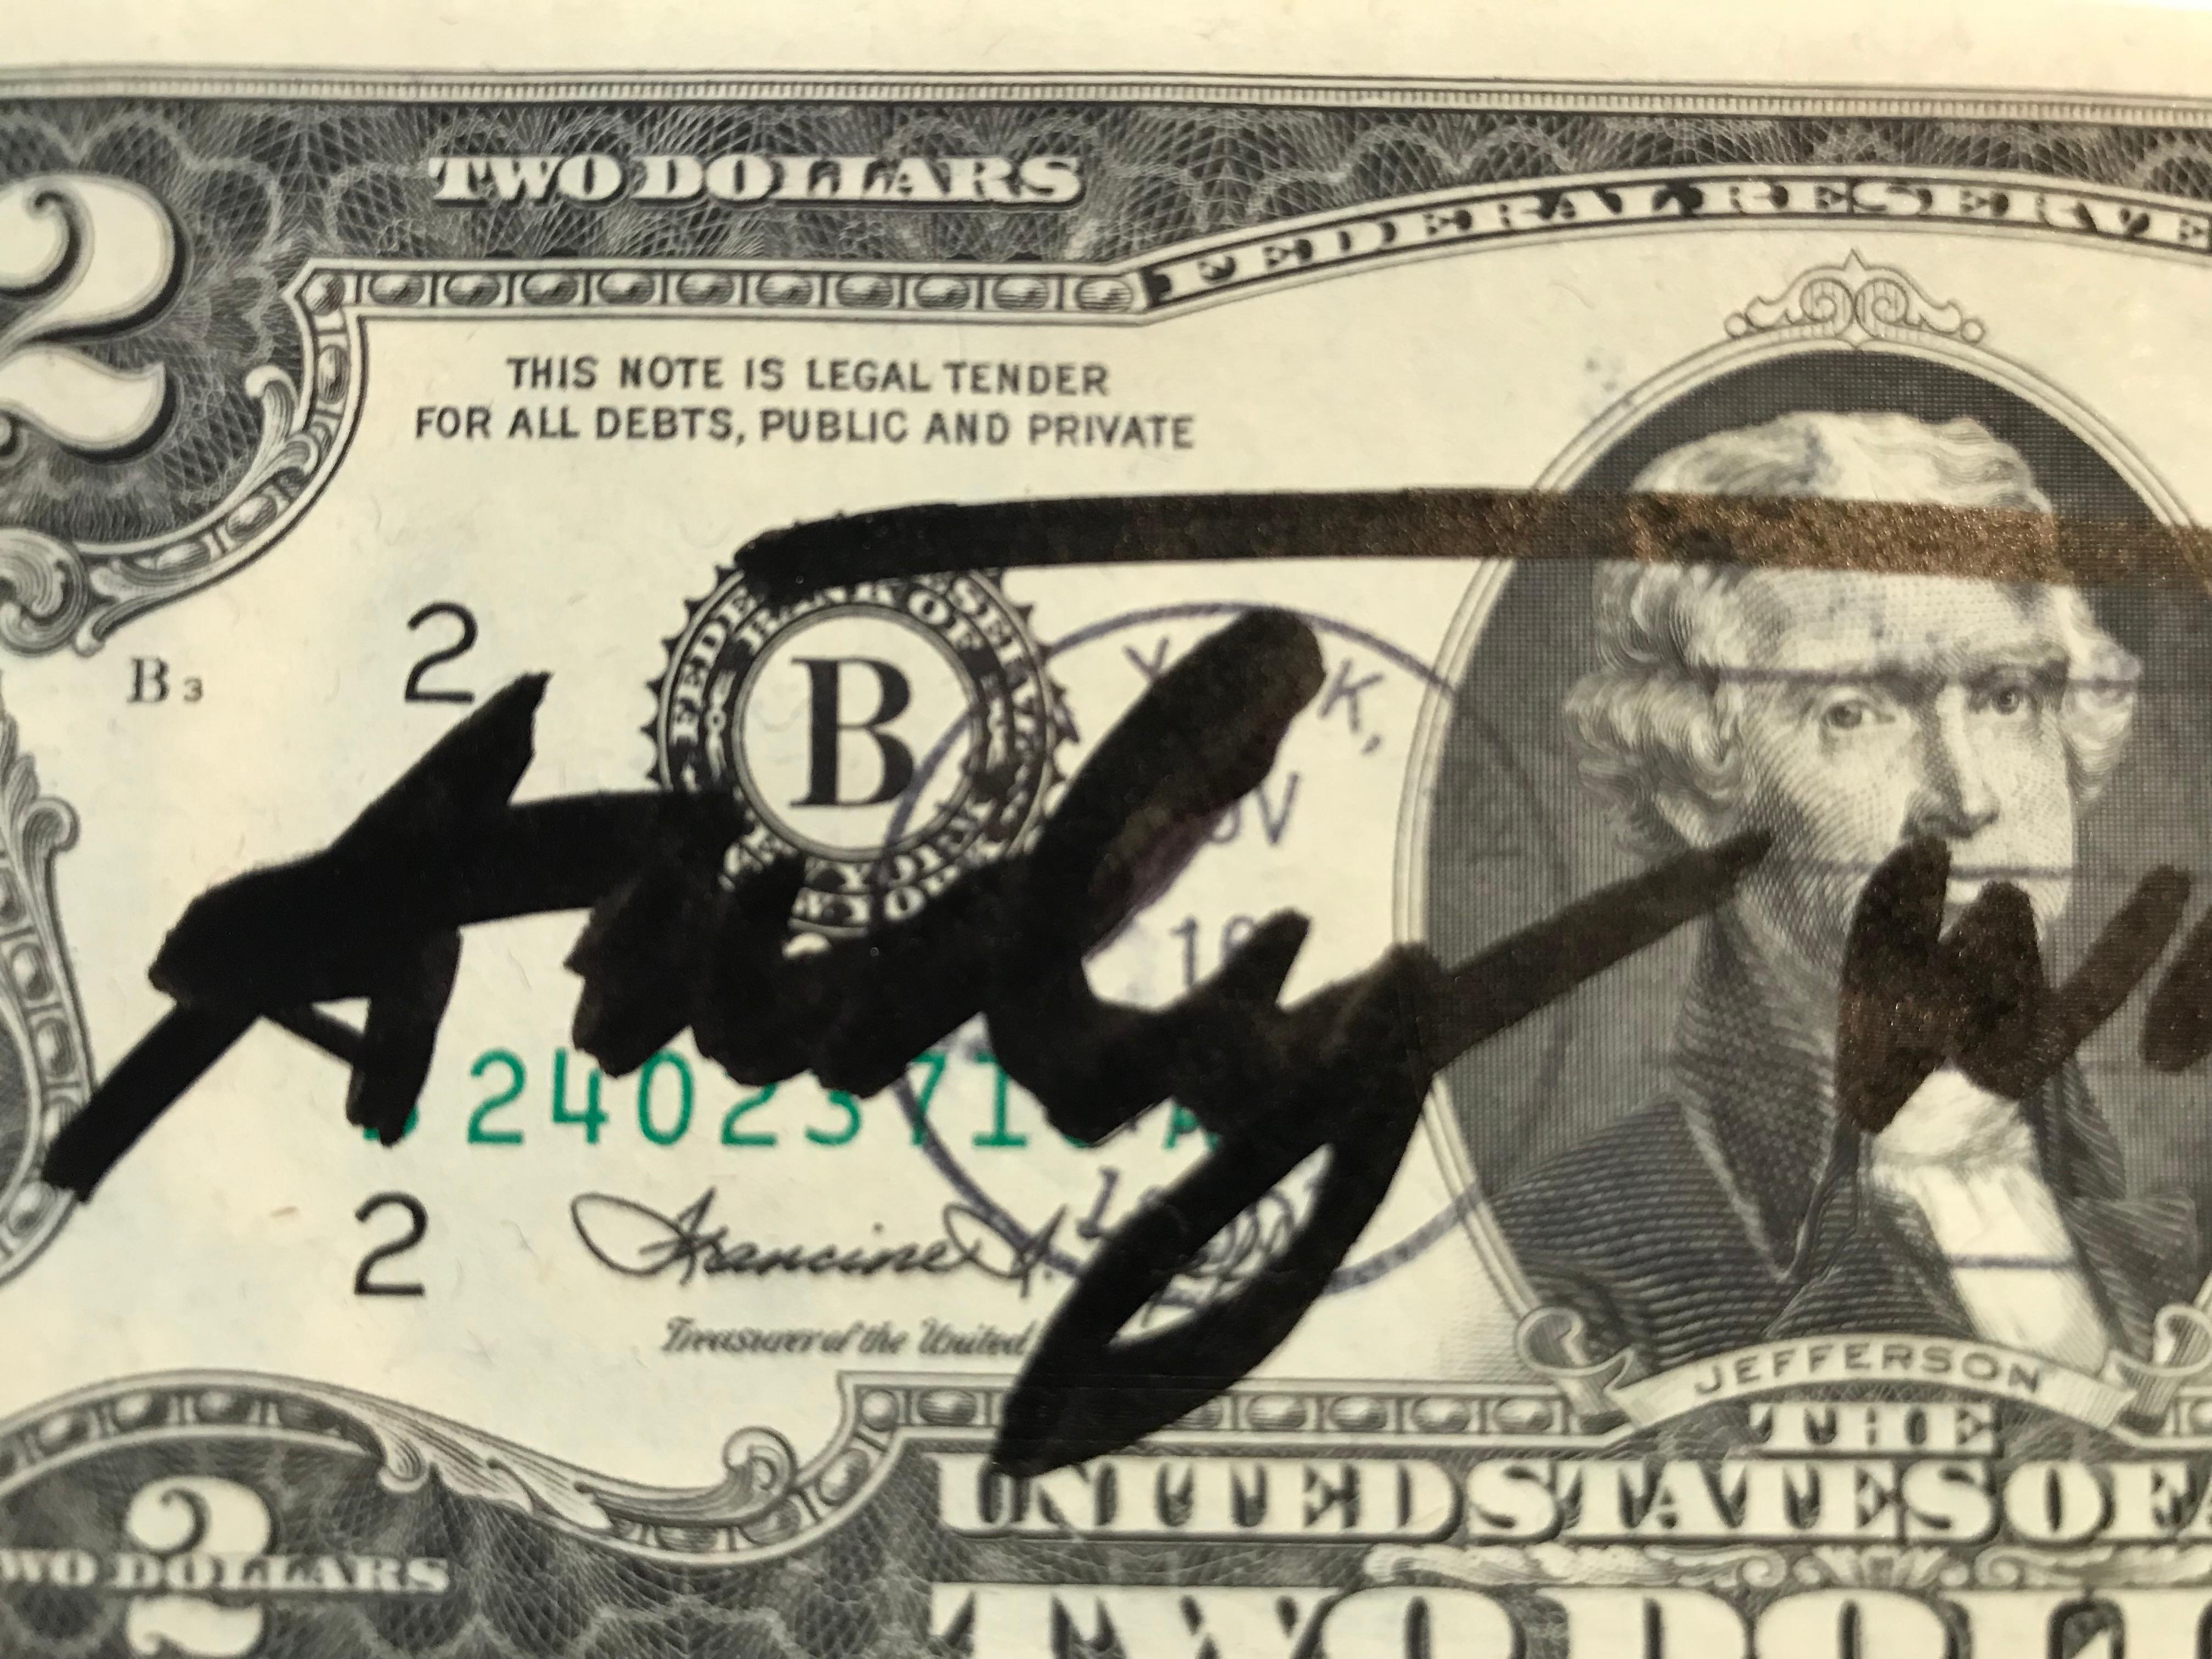 Andy WARHOL
Signed 2$ bill
Signature on the front, with stamps of 1st day issue (1976)
Andy Warhol stamps on the reverse
excellent condition